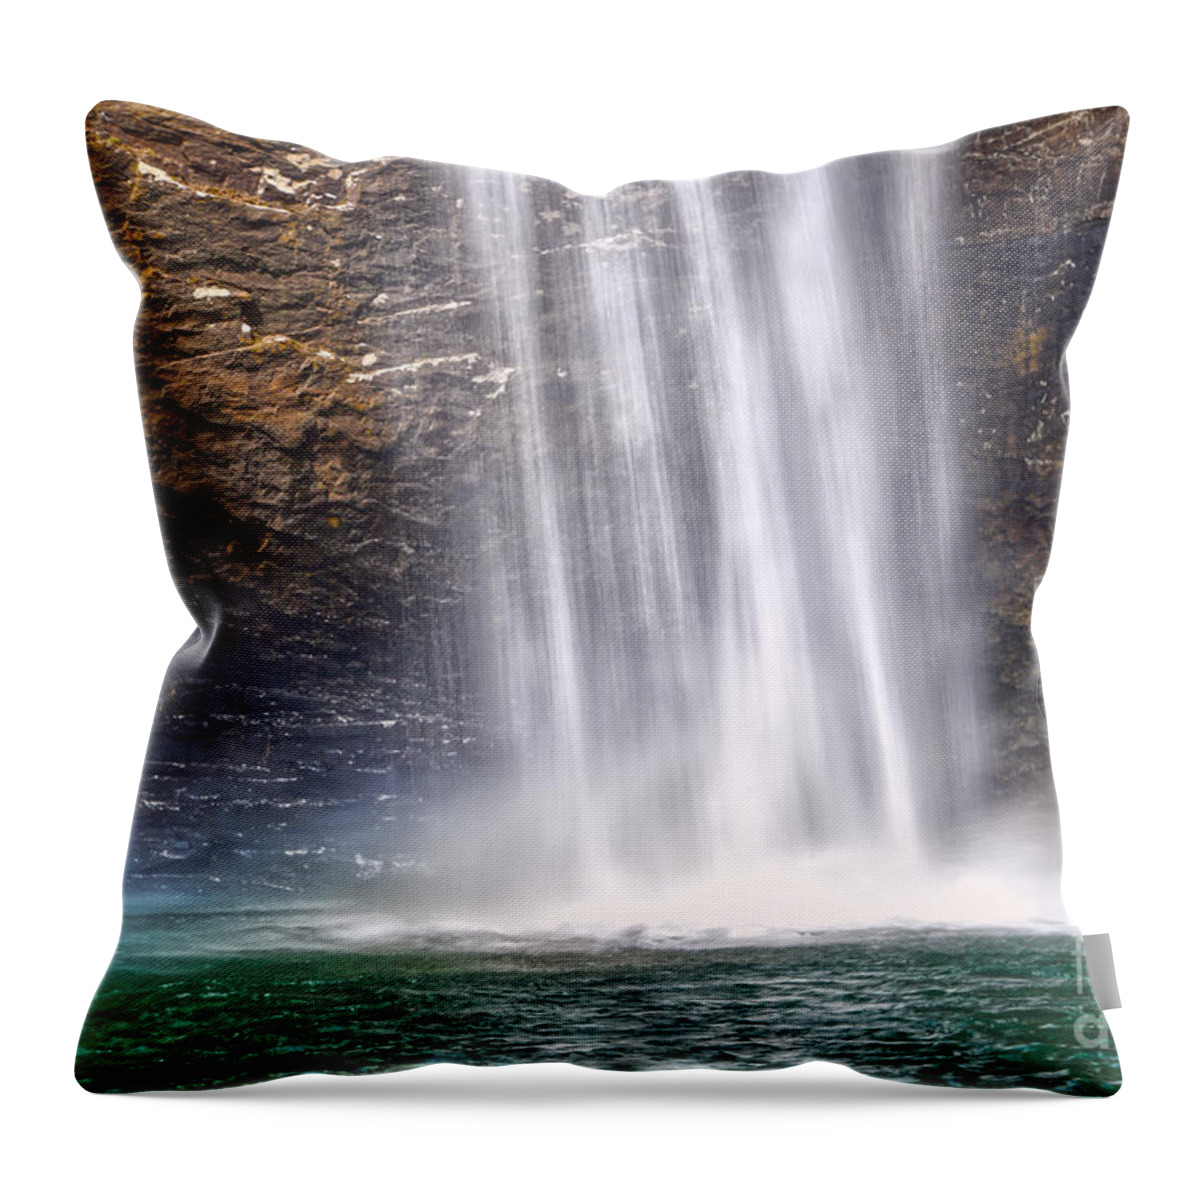 Foster Falls Throw Pillow featuring the photograph Foster Falls 5 by Phil Perkins